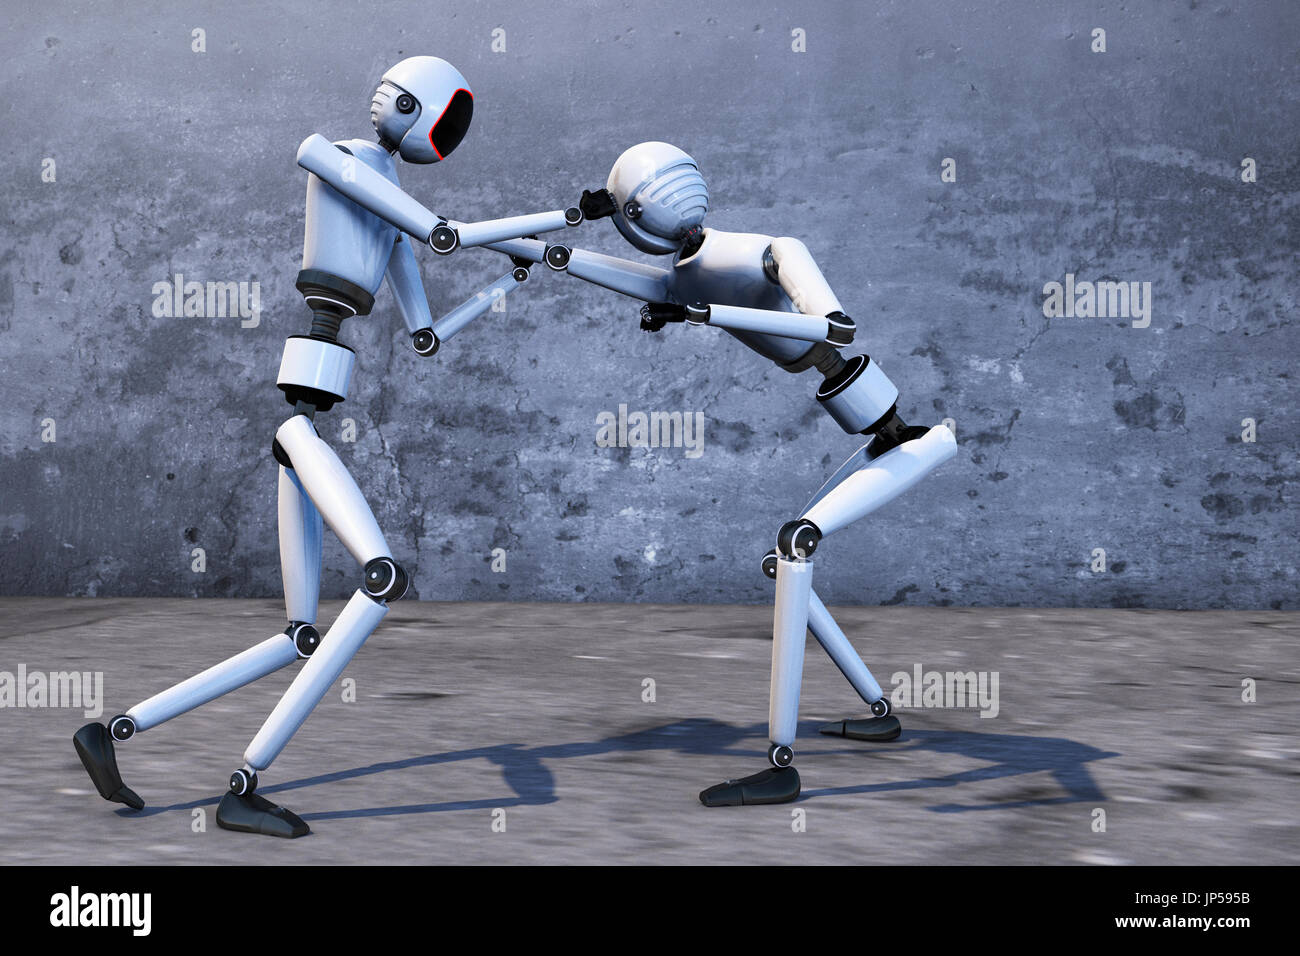 Robot Boxing High Resolution Stock Photography and Images - Alamy